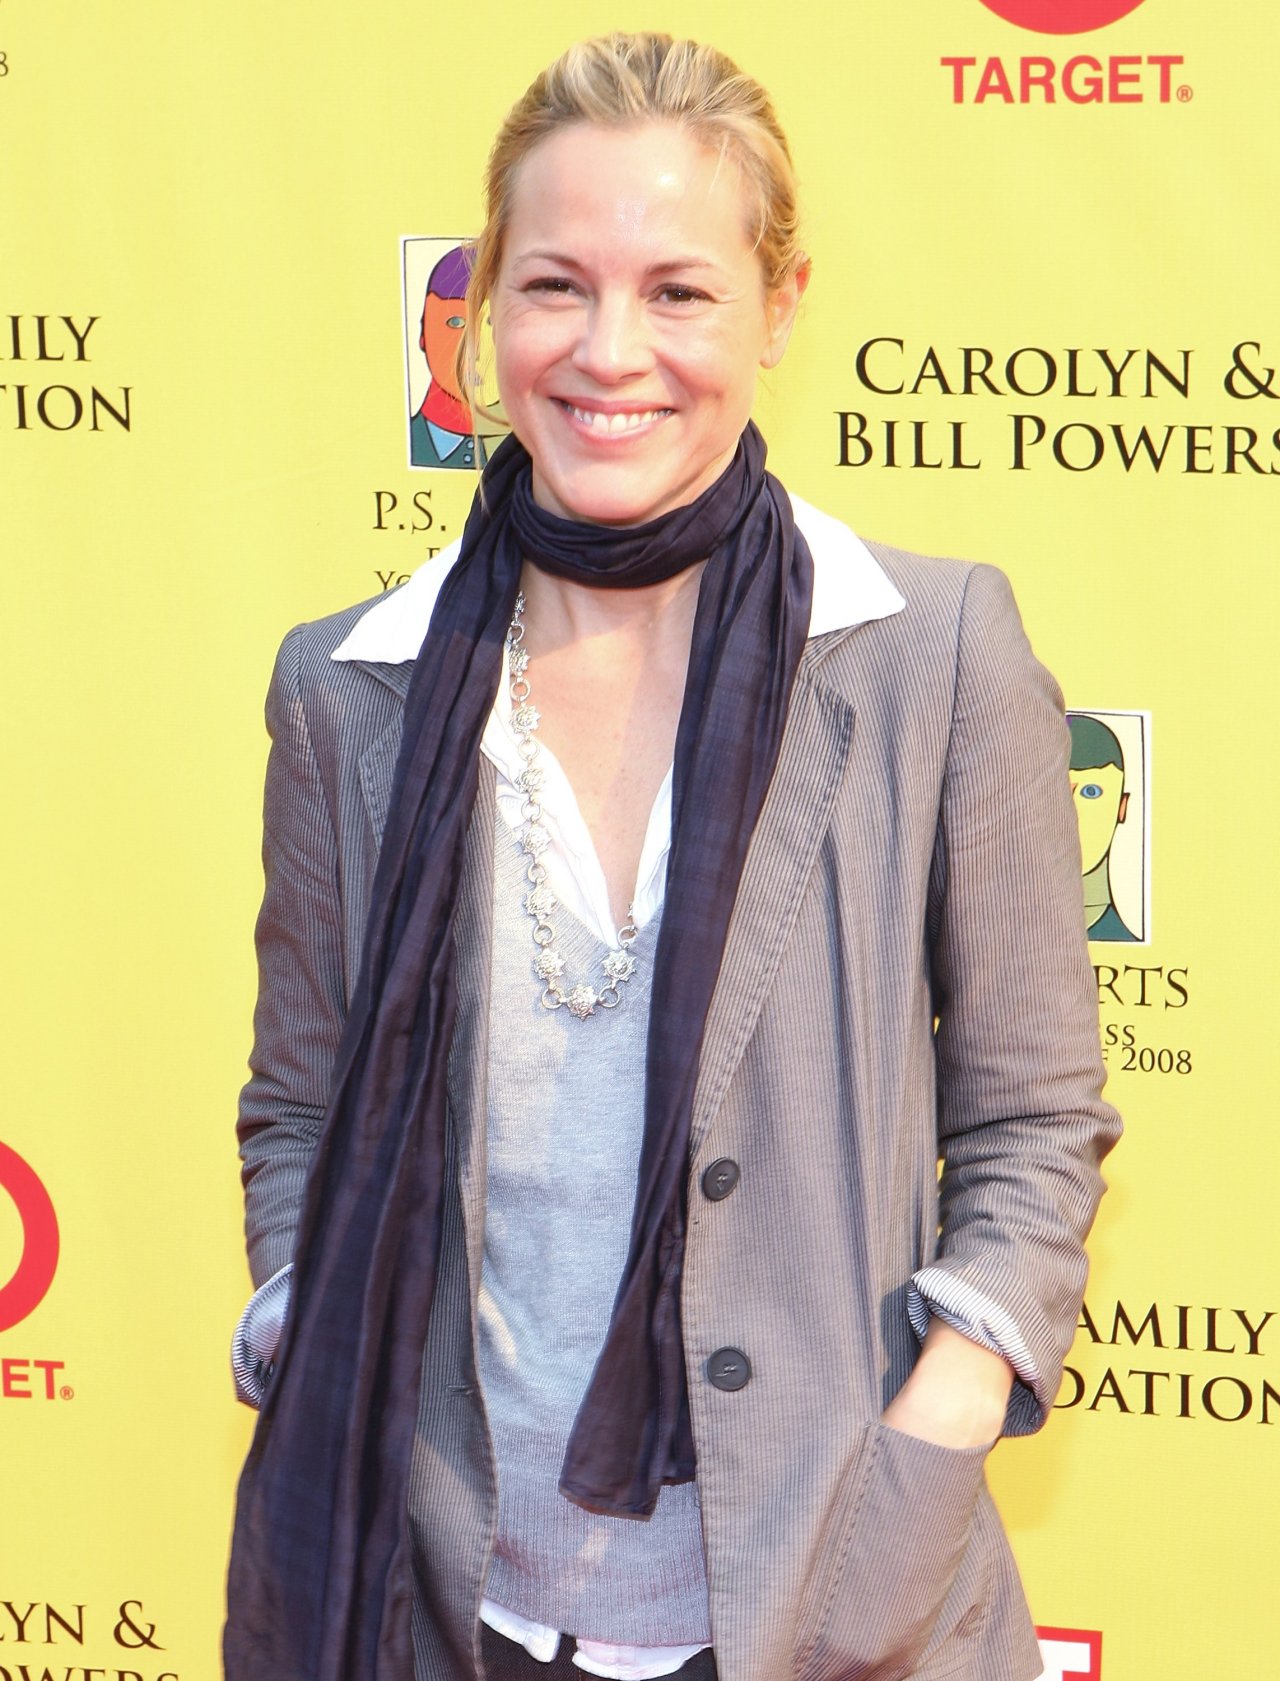 Maria Bello leaked wallpapers